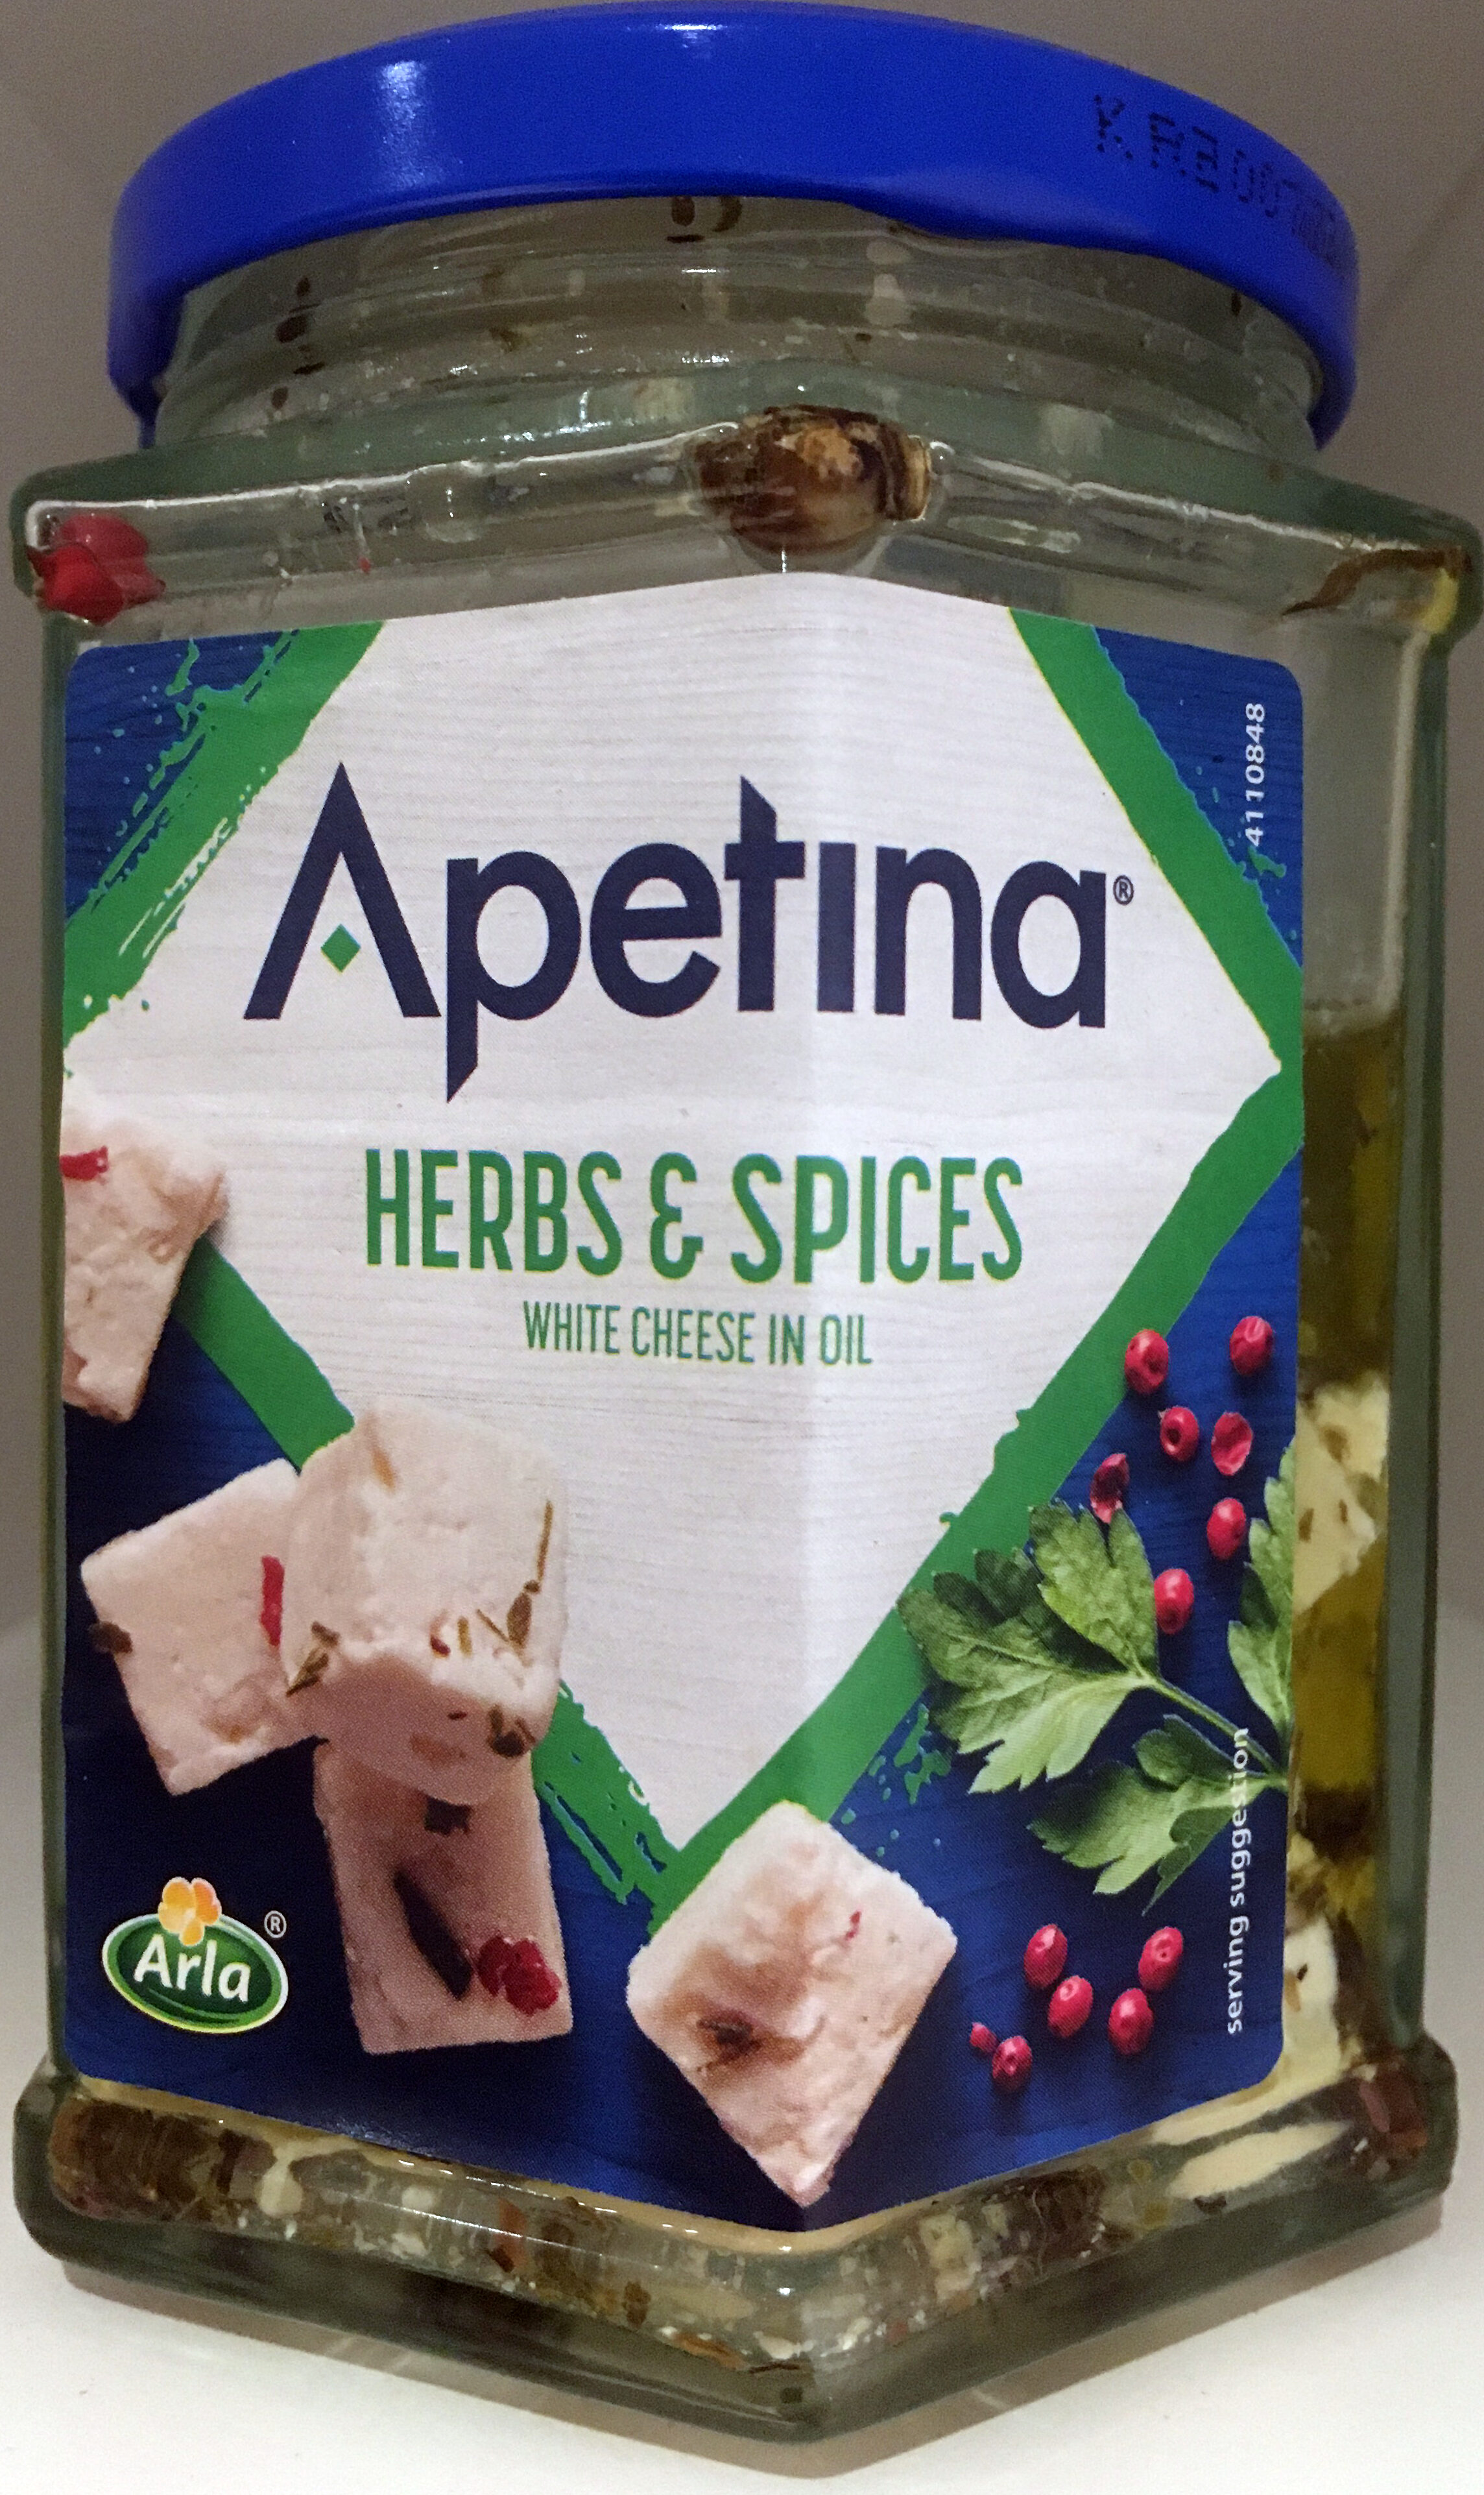 Apetina herbs & spices - Product - fi